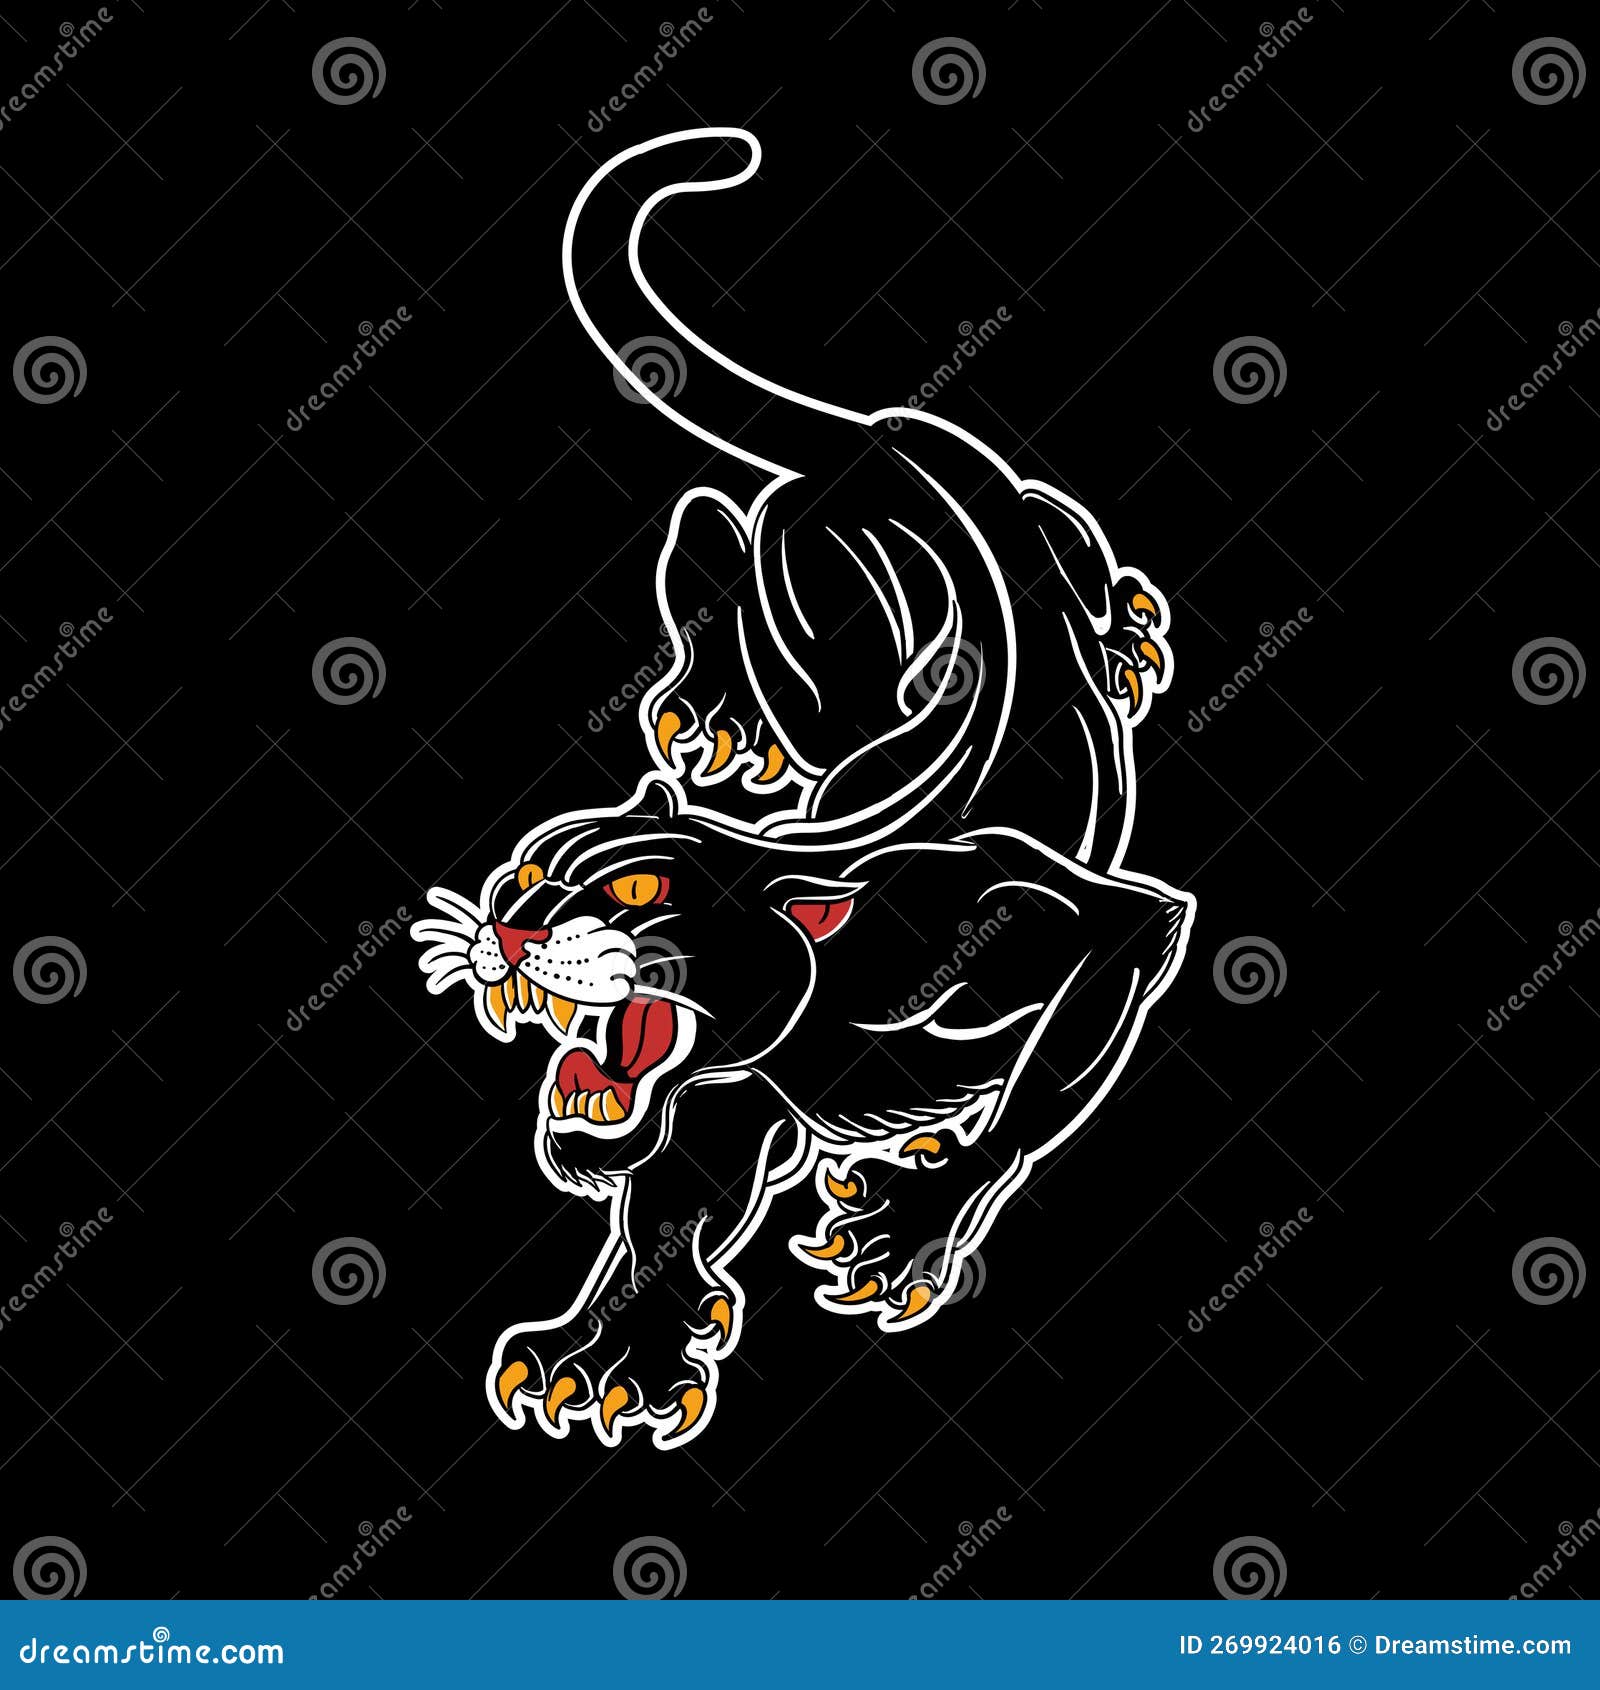 Old School Tattoo Vector Art PNG, Black Panther Tattoo Old School, Black,  Panther, Animal PNG Image For Free Download